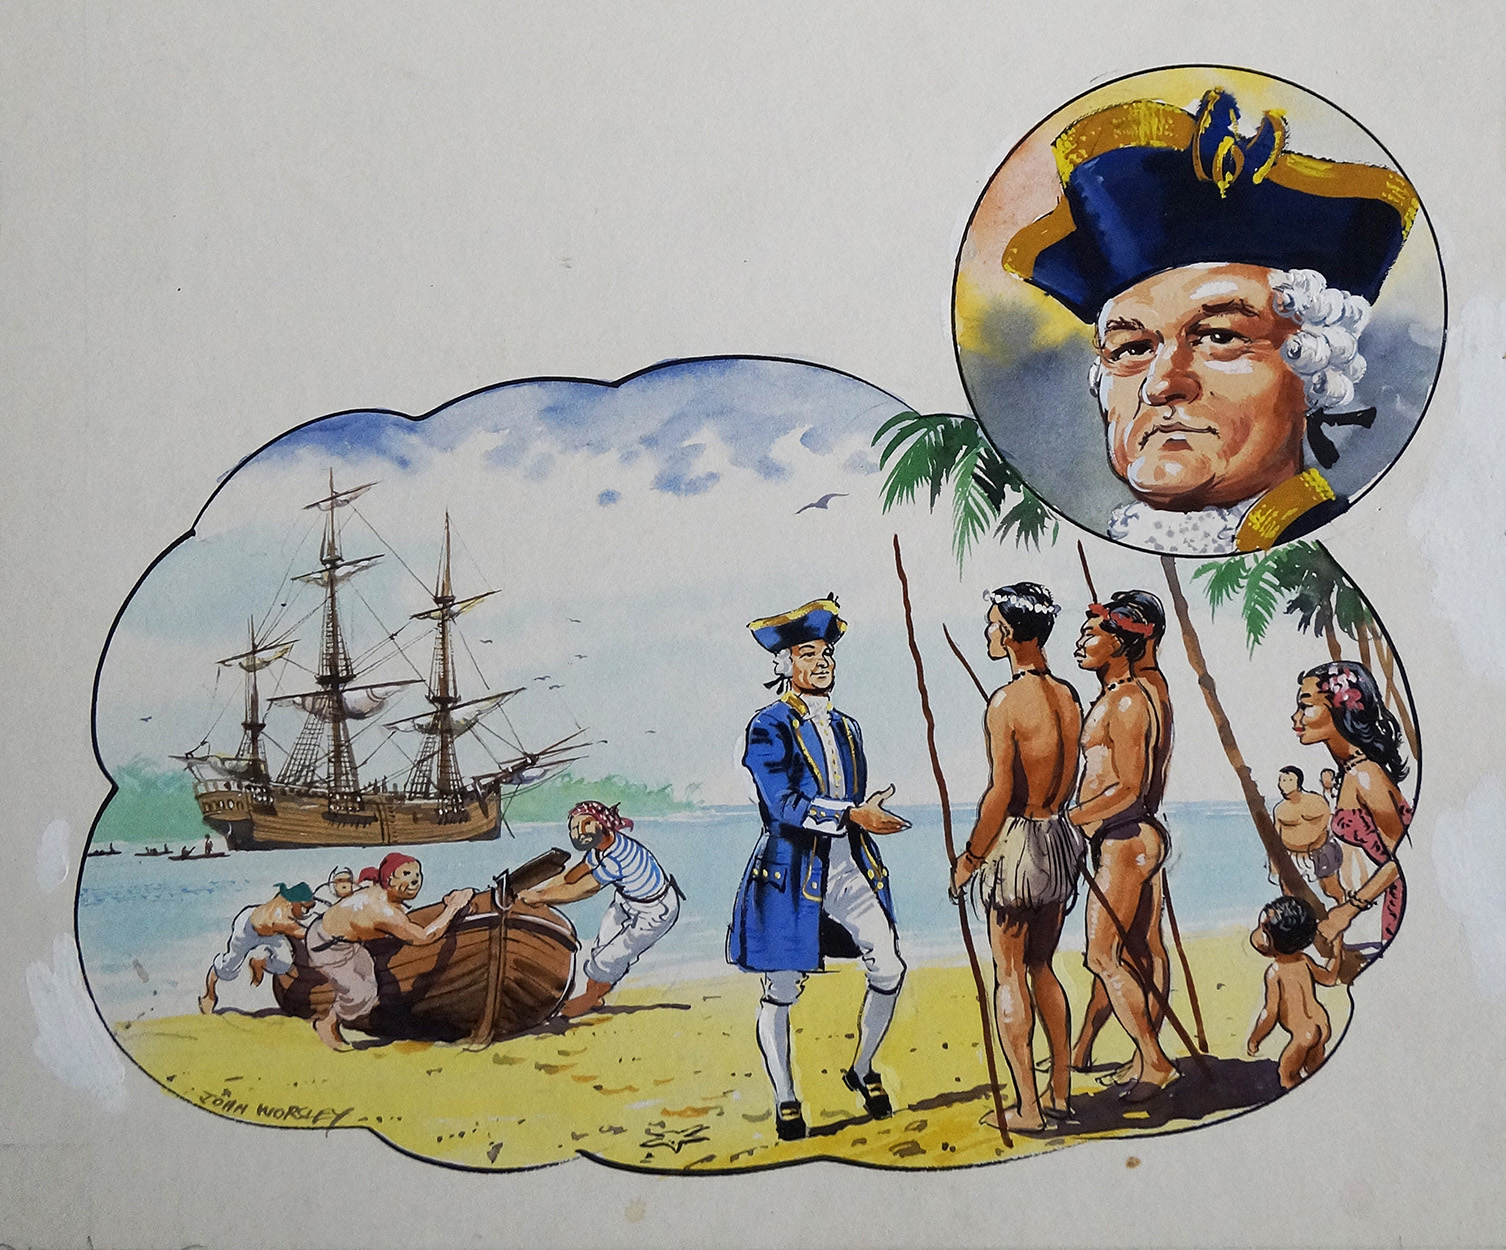 Captain Cook and HMS Endeavour (Original) (Signed) art by Wee Willie Winkie (Worsley) at The Illustration Art Gallery